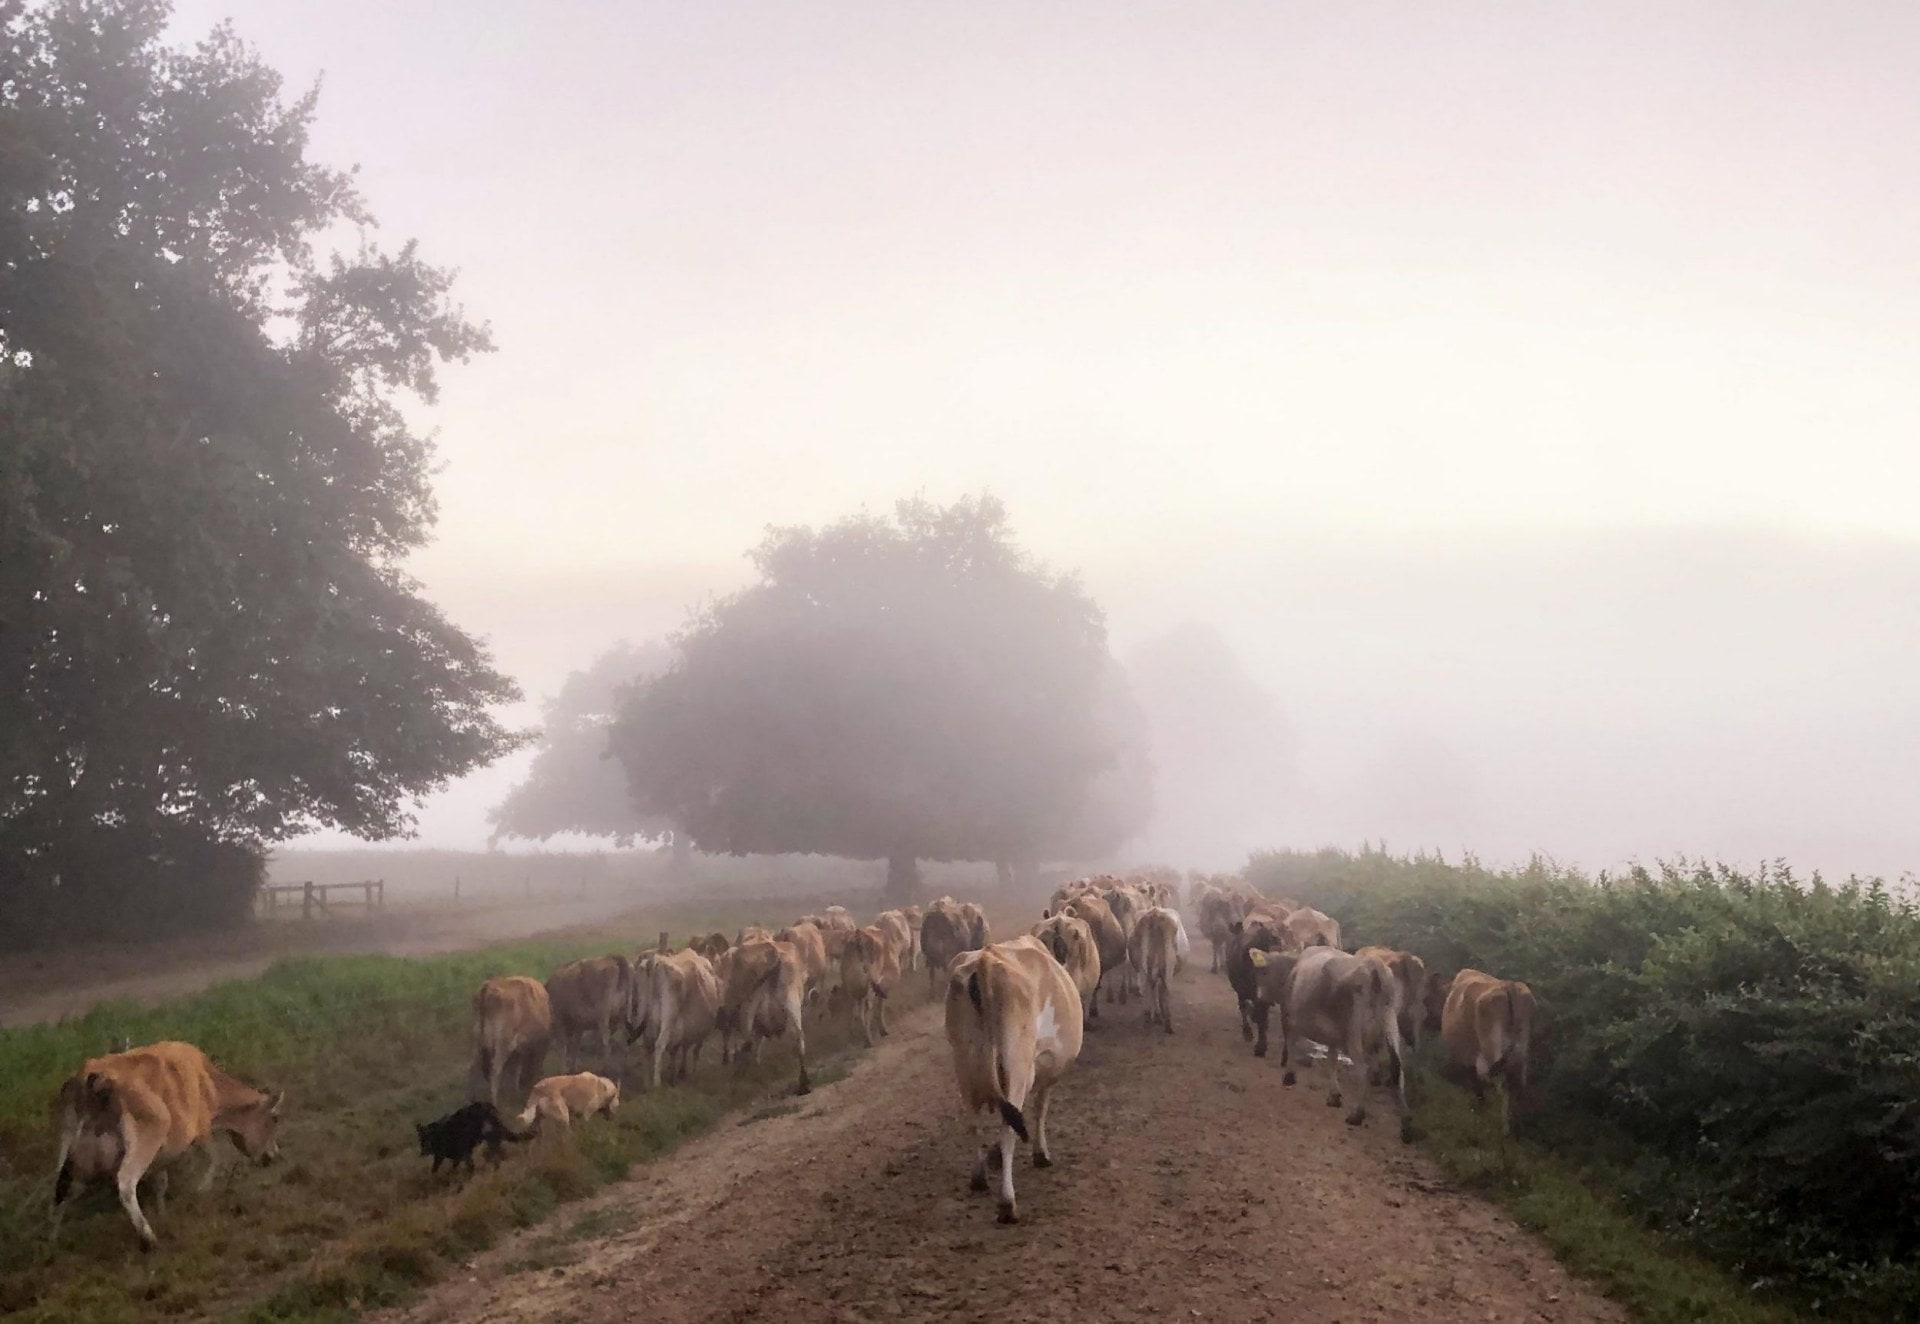 Brown and white Jersey cows walking on path in morning fog